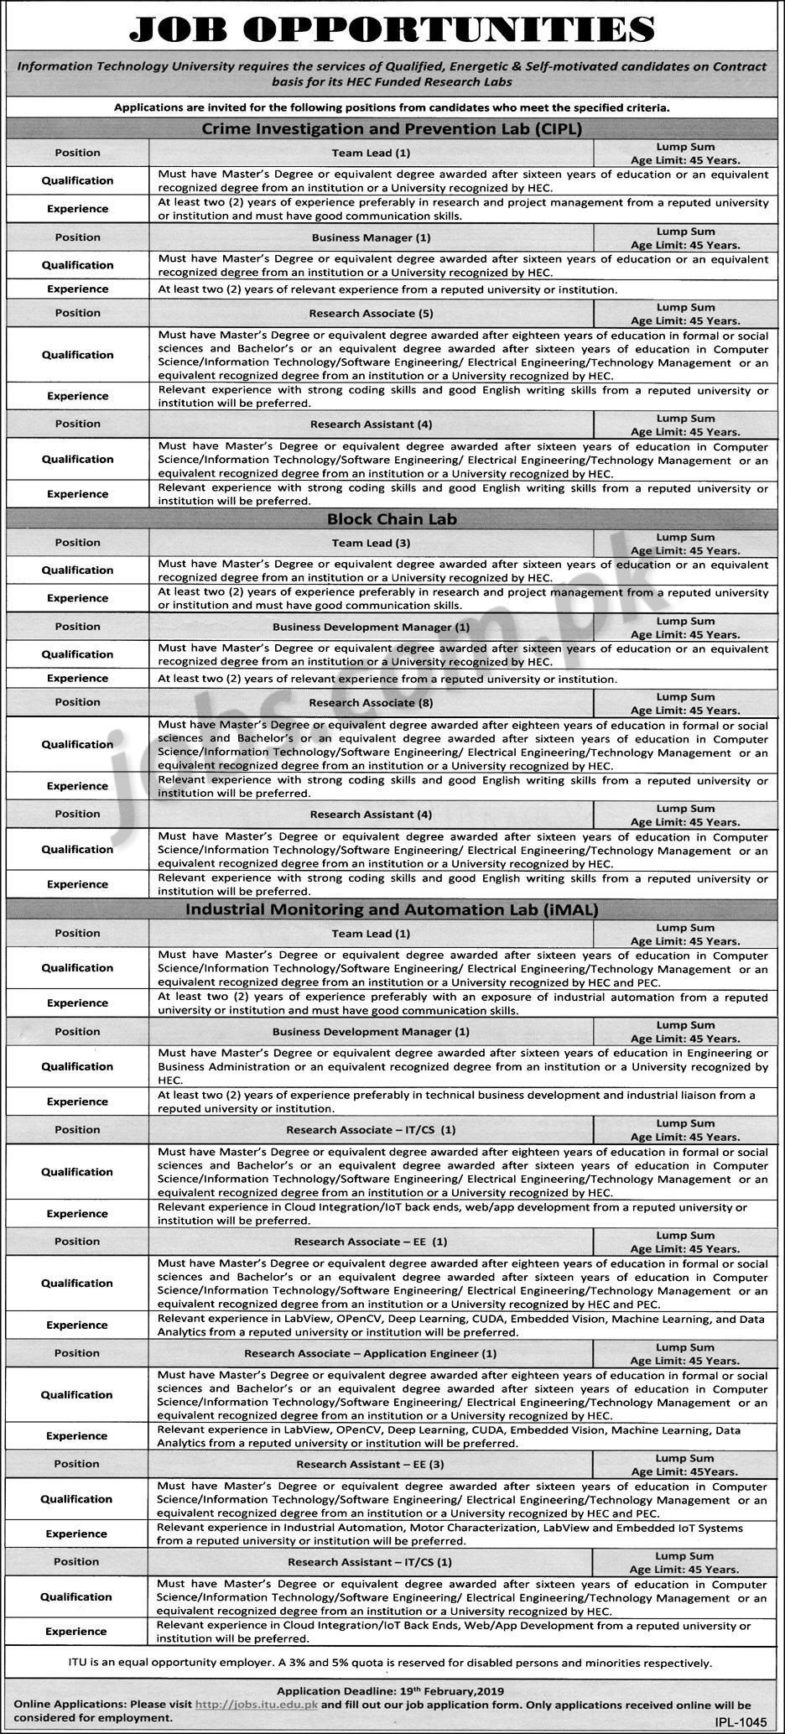 Information Technology University Jobs 2019 for 36+ Research, Business Development Manager, Team Lead & Other Posts